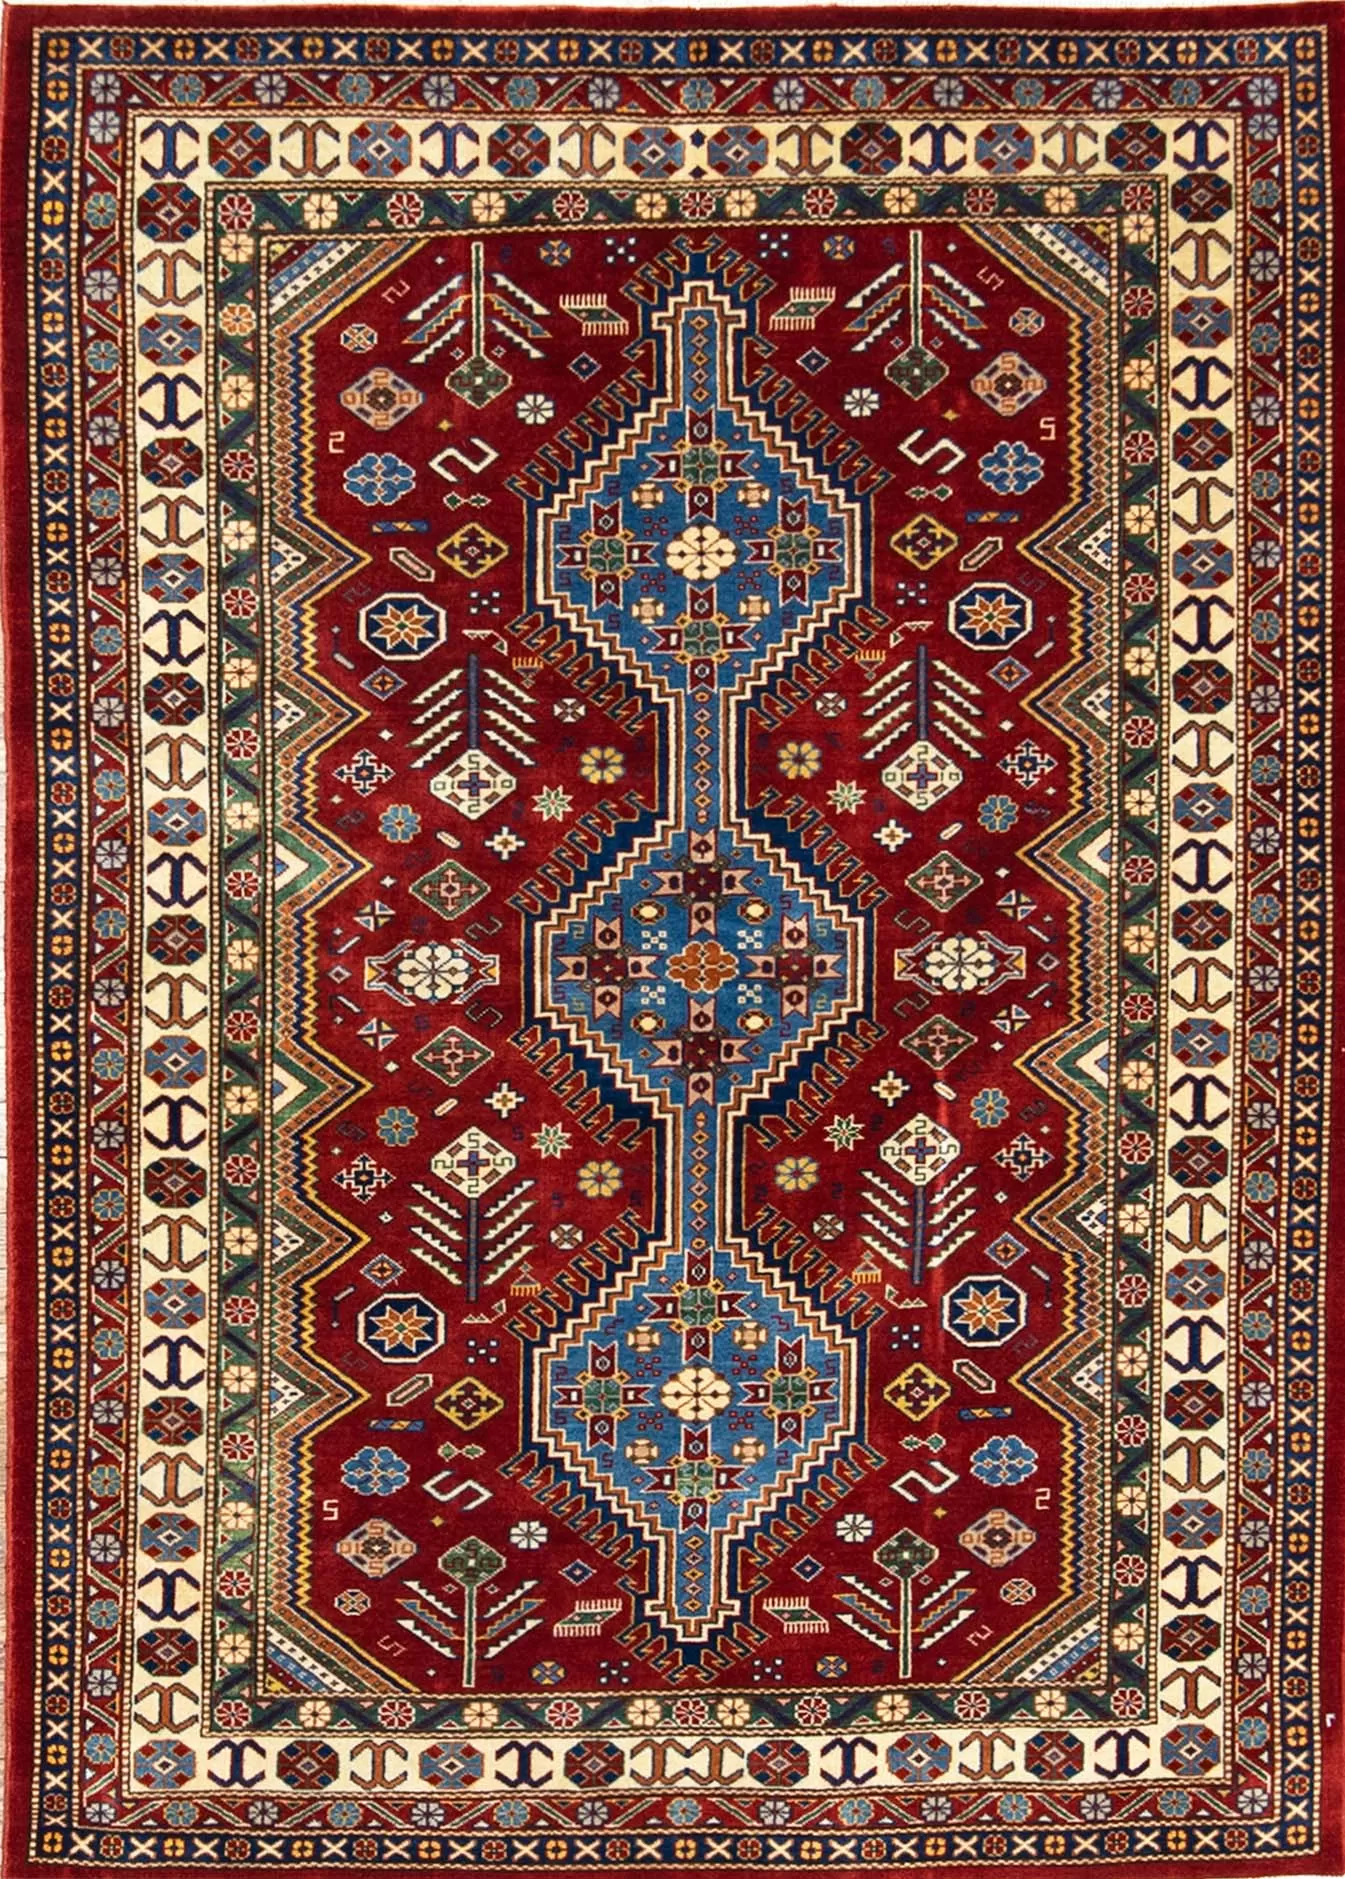 Red oriental rug. Handmade geometric style oriental rug in red and blue colors. Size 5x6.6.